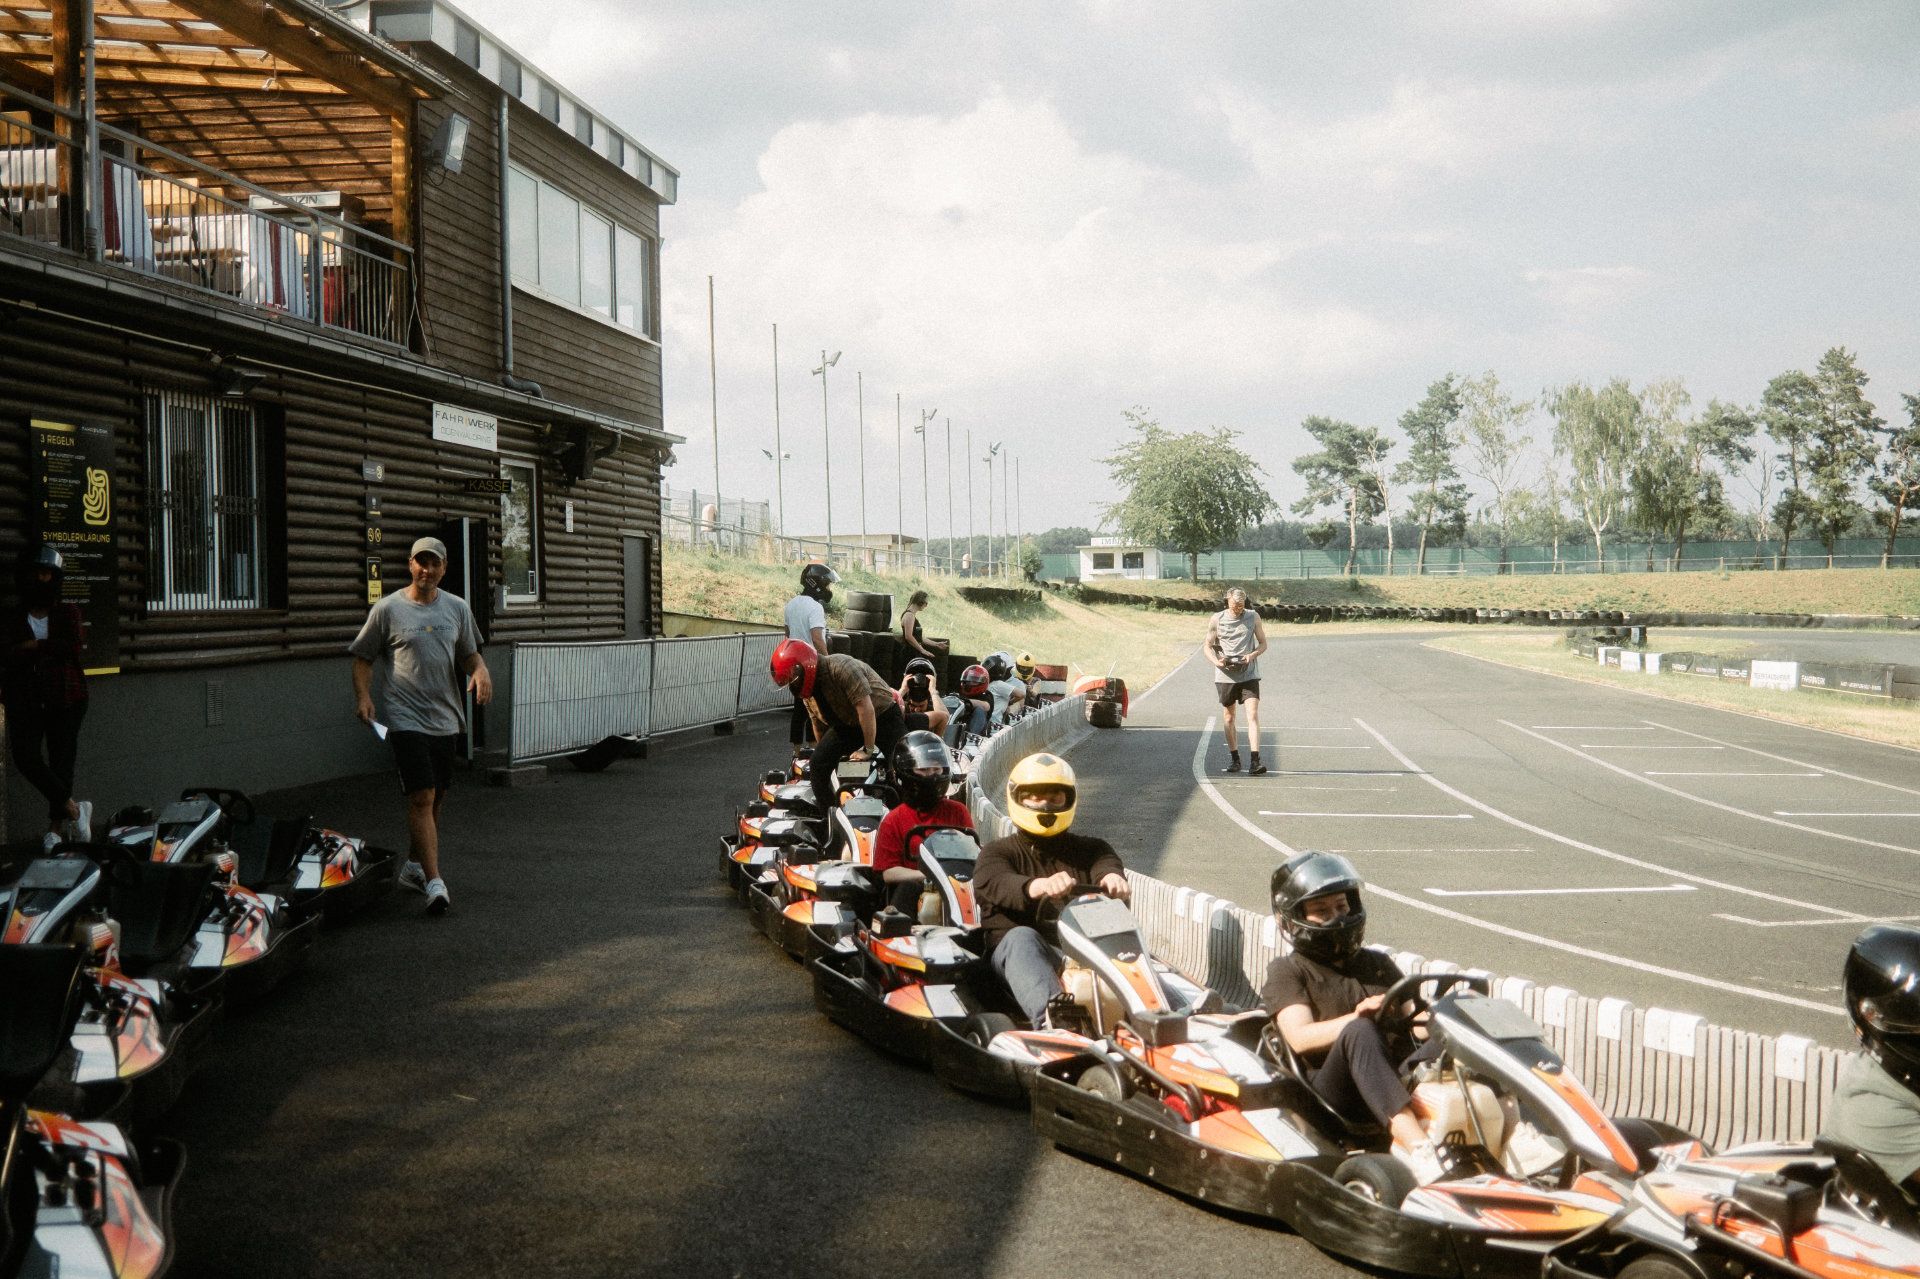 A lineup of go-karts and drivers ready for a race, with a bustling track environment in the background, captured by a videographer specializing in event photography.